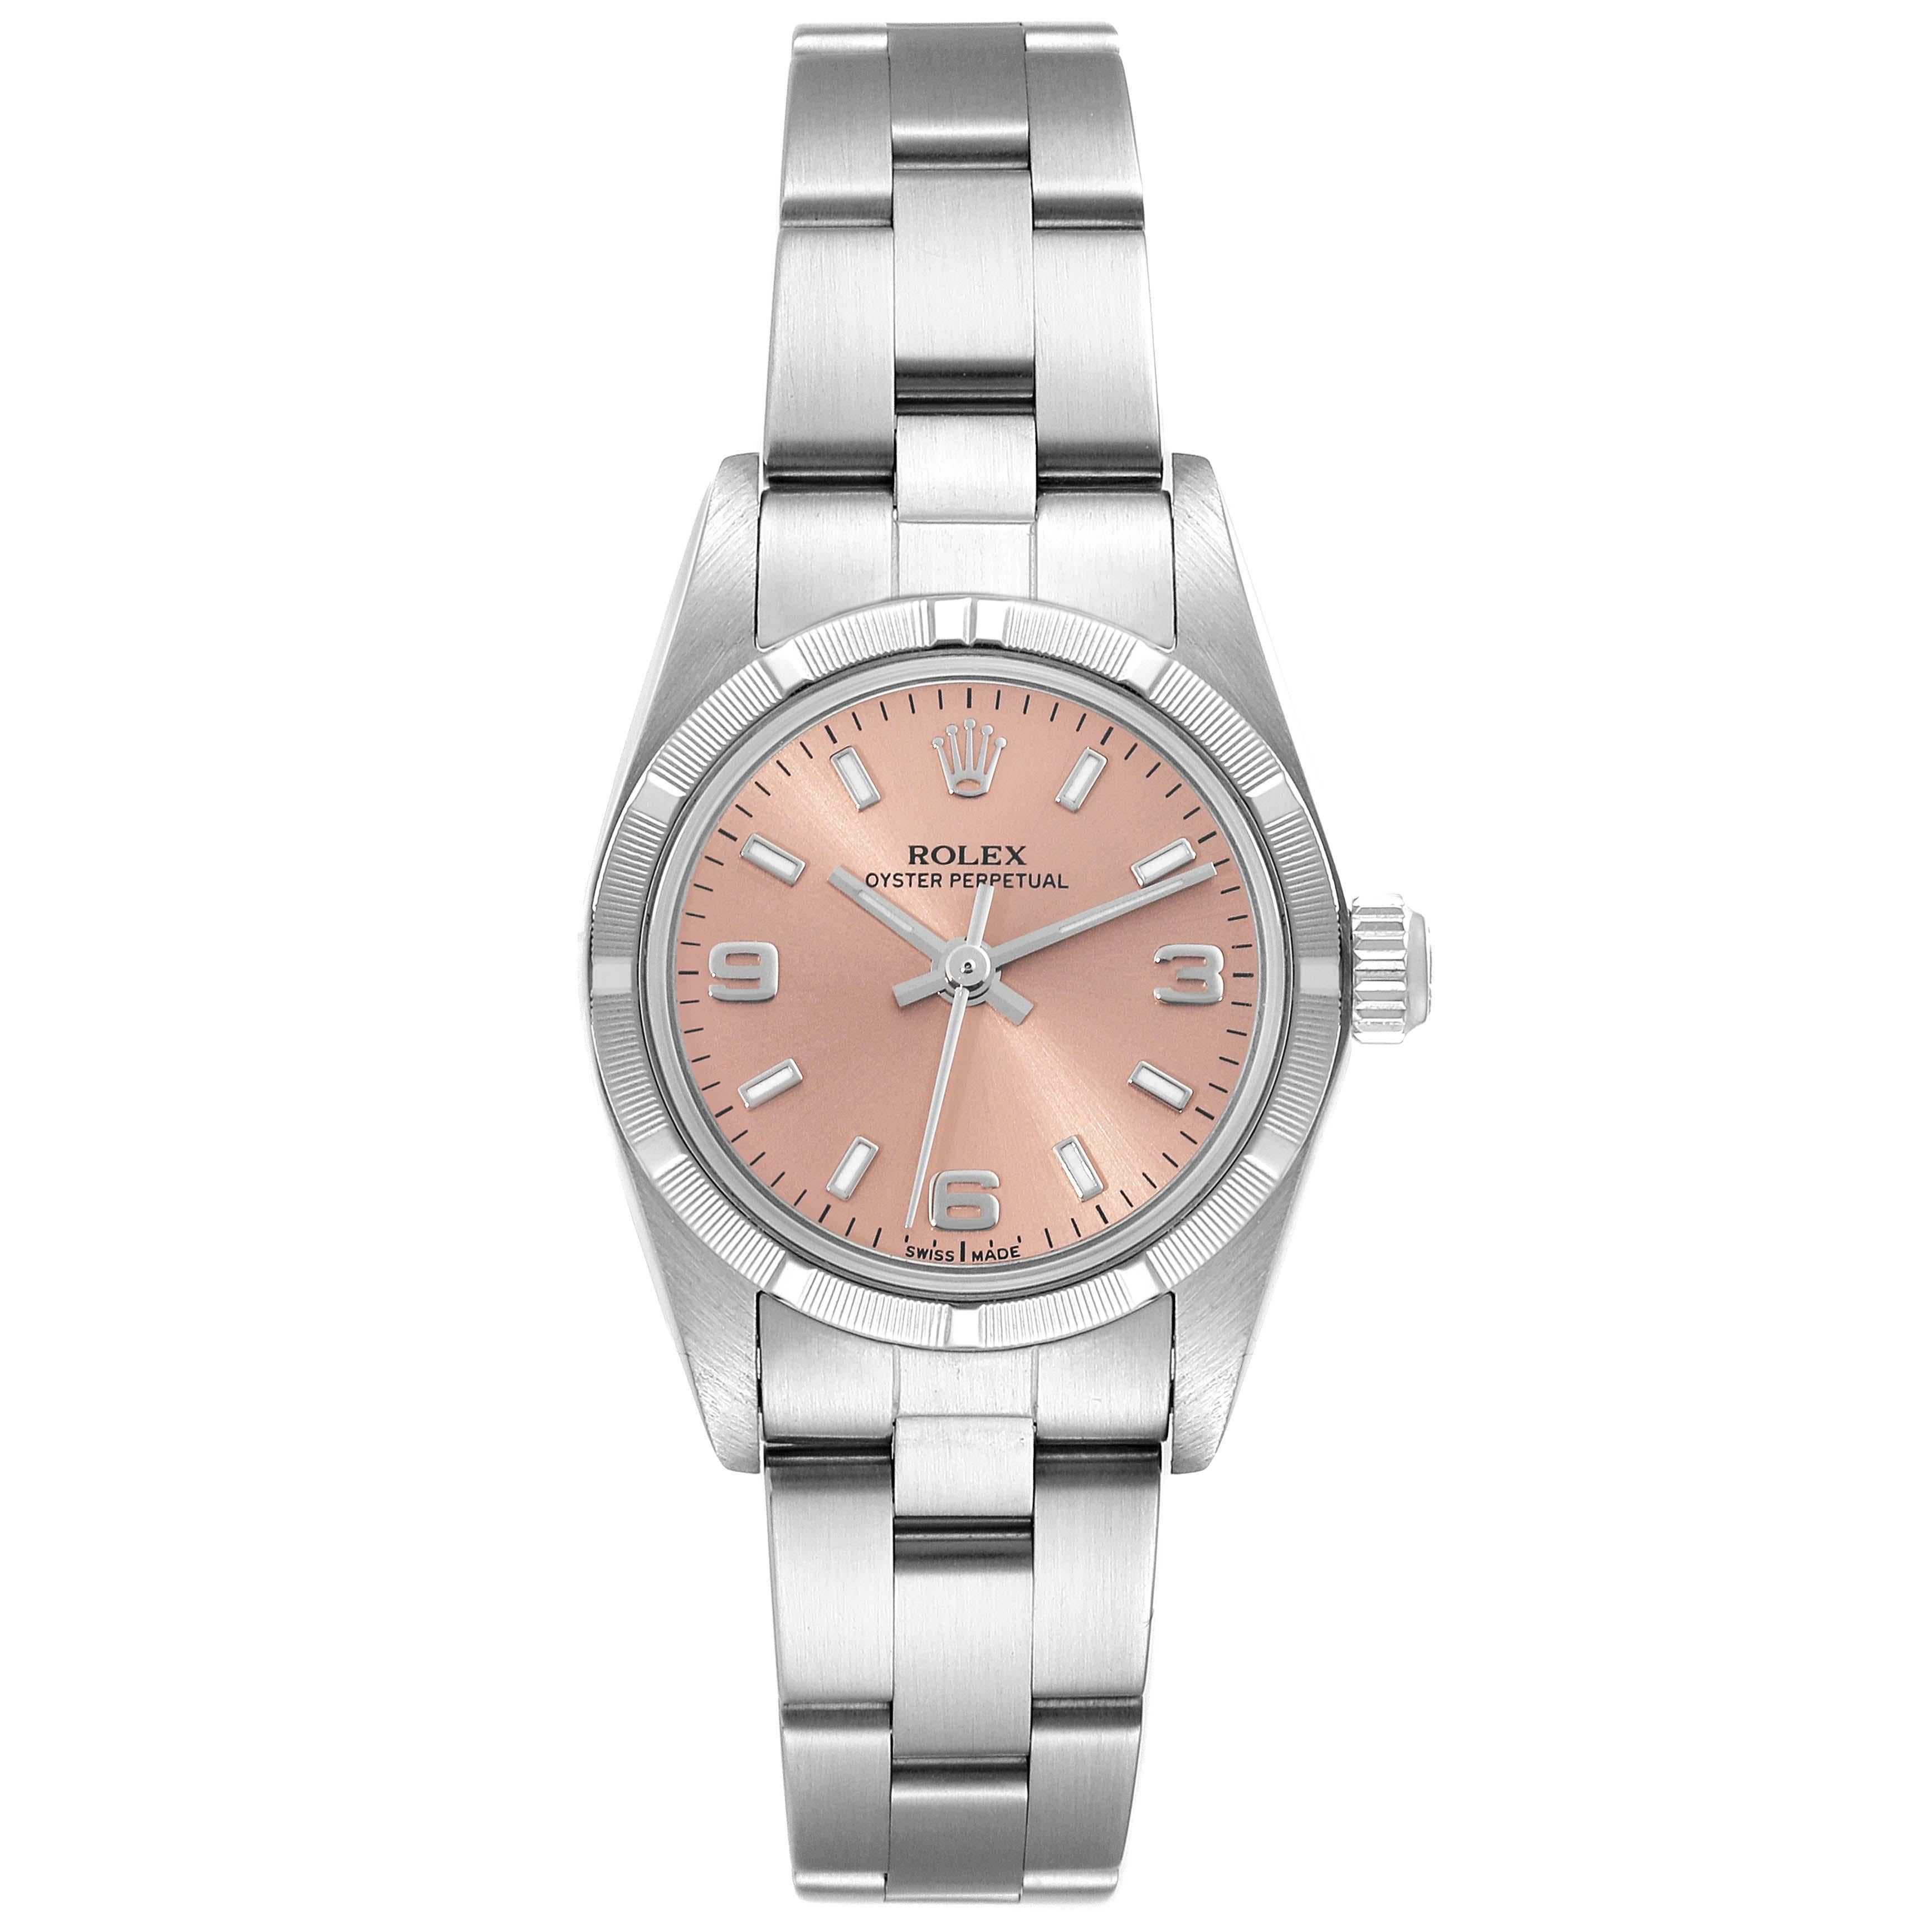 Rolex Oyster Perpetual Salmon Dial Steel Ladies Watch 76030. Officially certified chronometer automatic self-winding movement. Stainless steel oyster case 24.0 mm in diameter. Rolex logo on the crown. Stainless steel engine turned bezel. Scratch